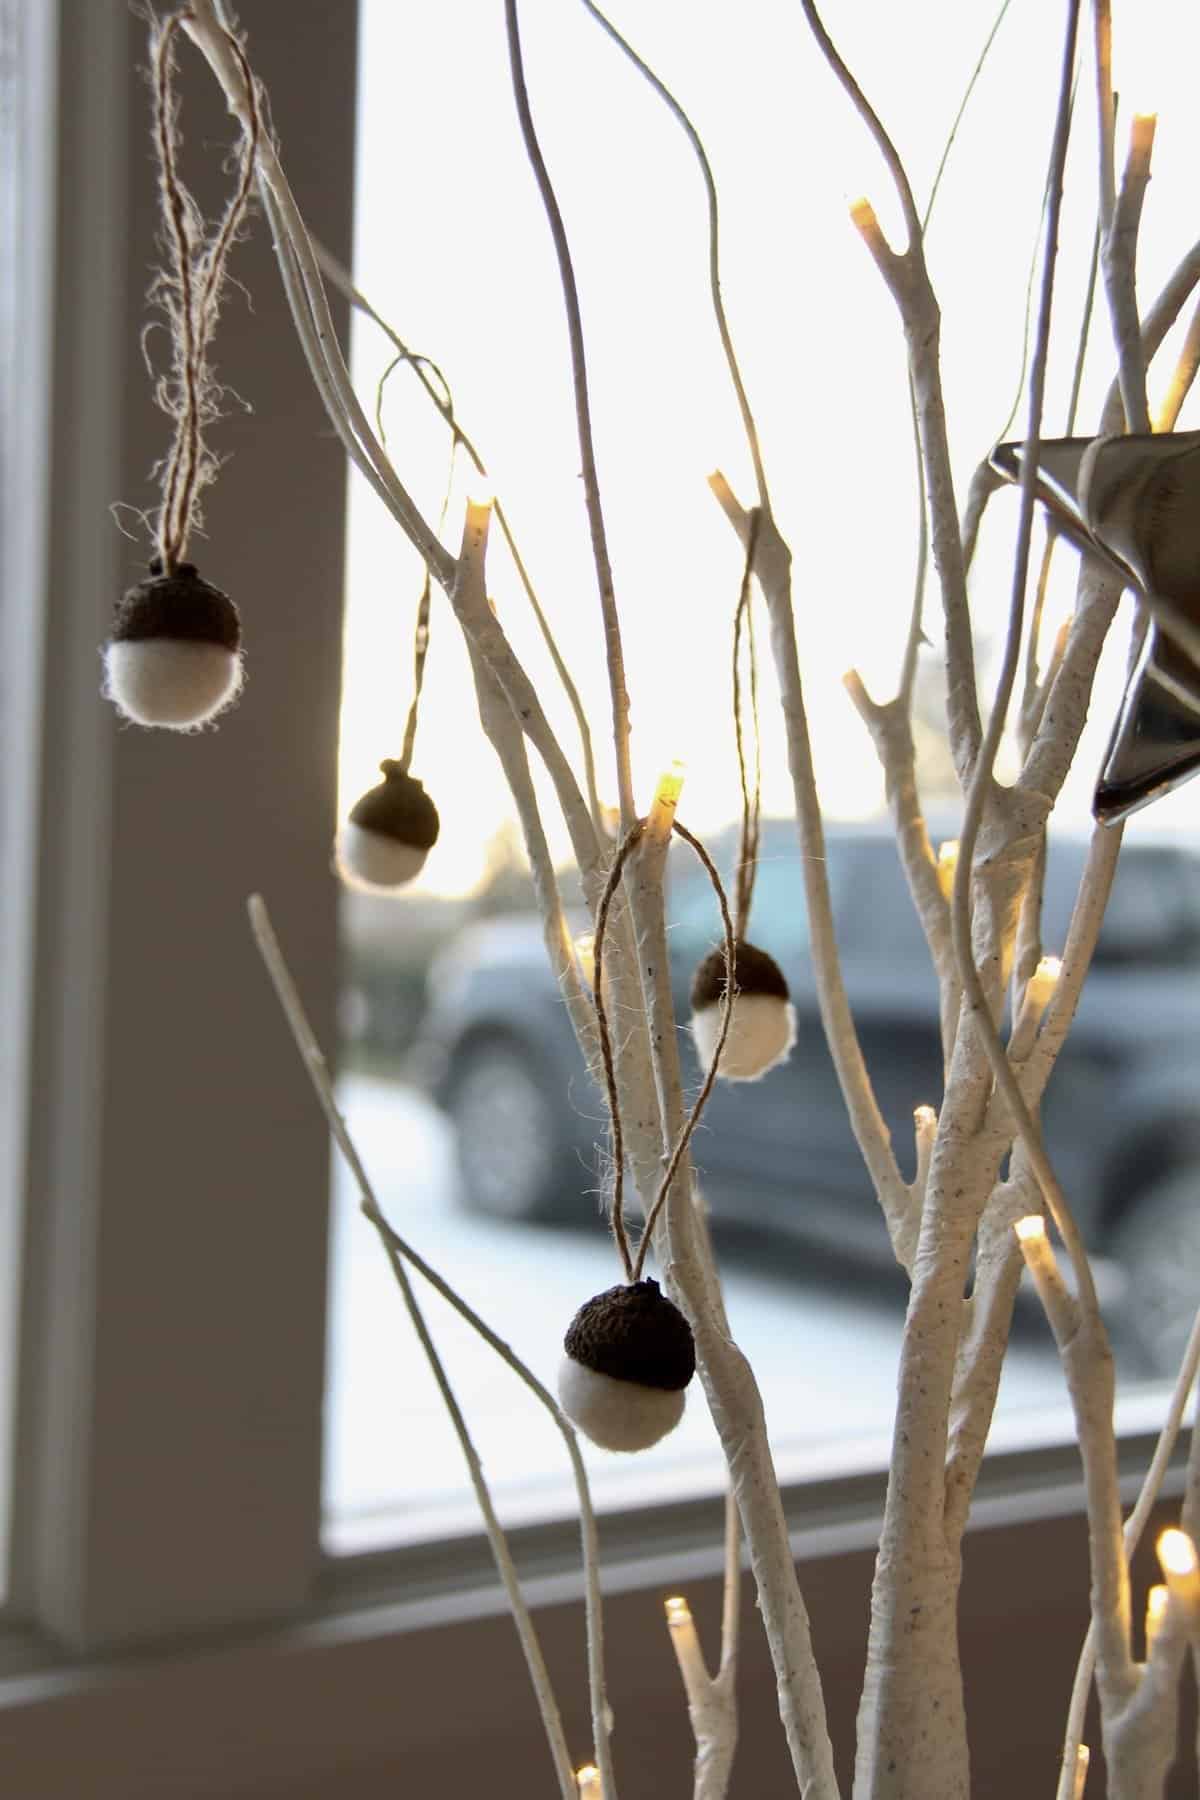 So cute! Here's how to make these adorable wool acorn christmas ornaments. These are the perfect natural christmas ornaments to diy this year. #woolacorns #woollenacorns #wetfeltedacorns #wetfelting